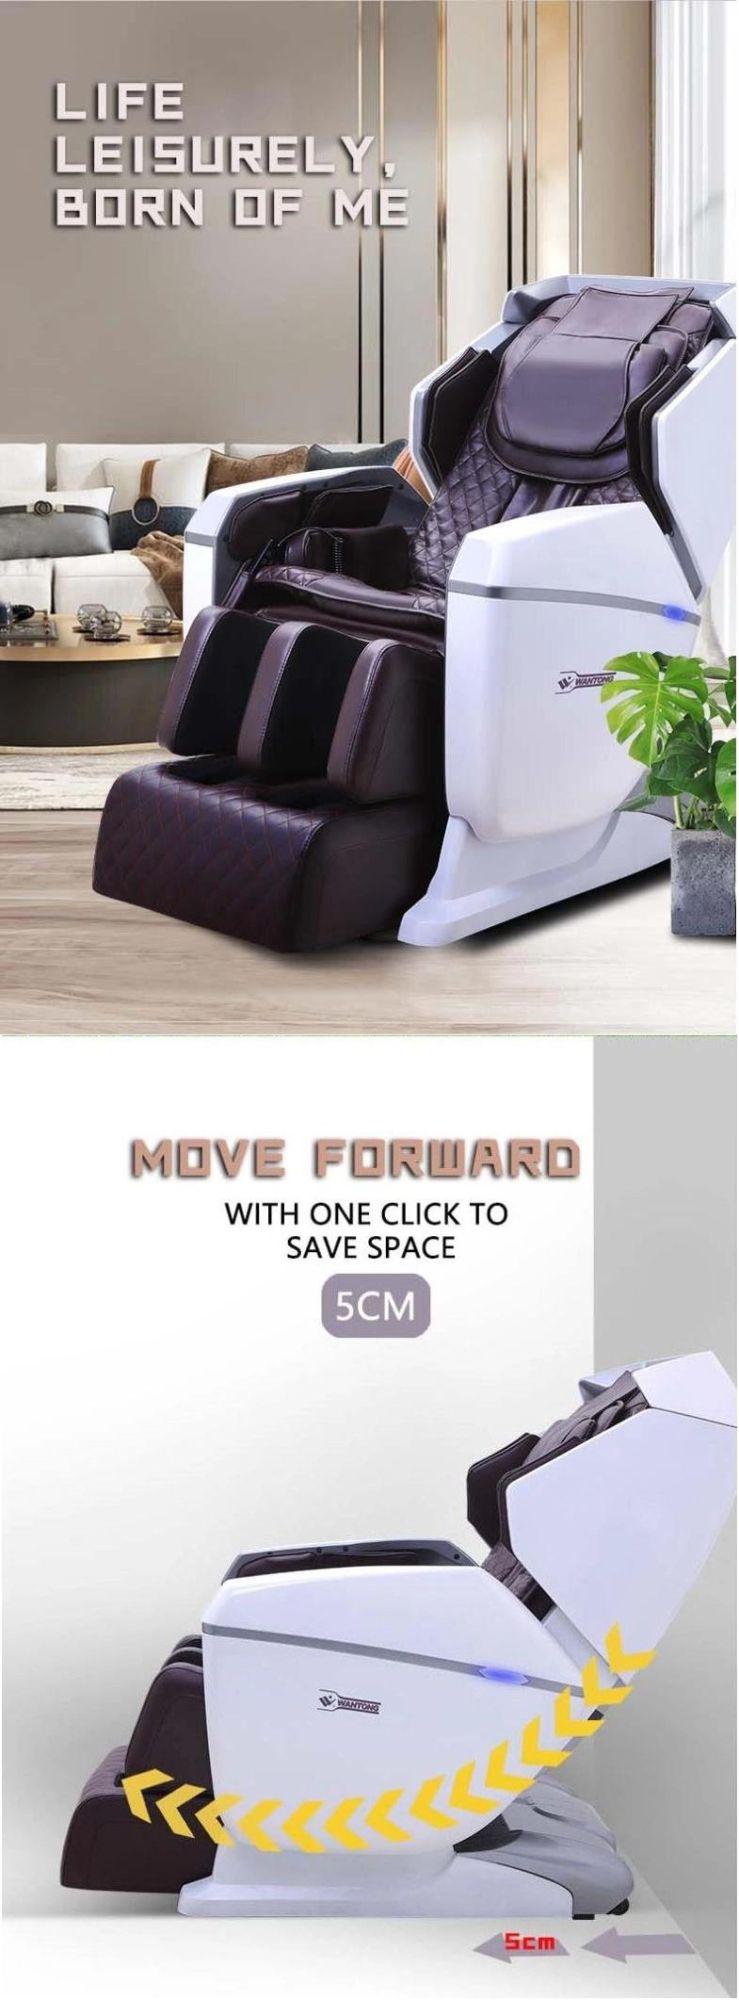 2021 Home Luxury Cheap Price Full Body 3D Hand Electric Music Massage Chair